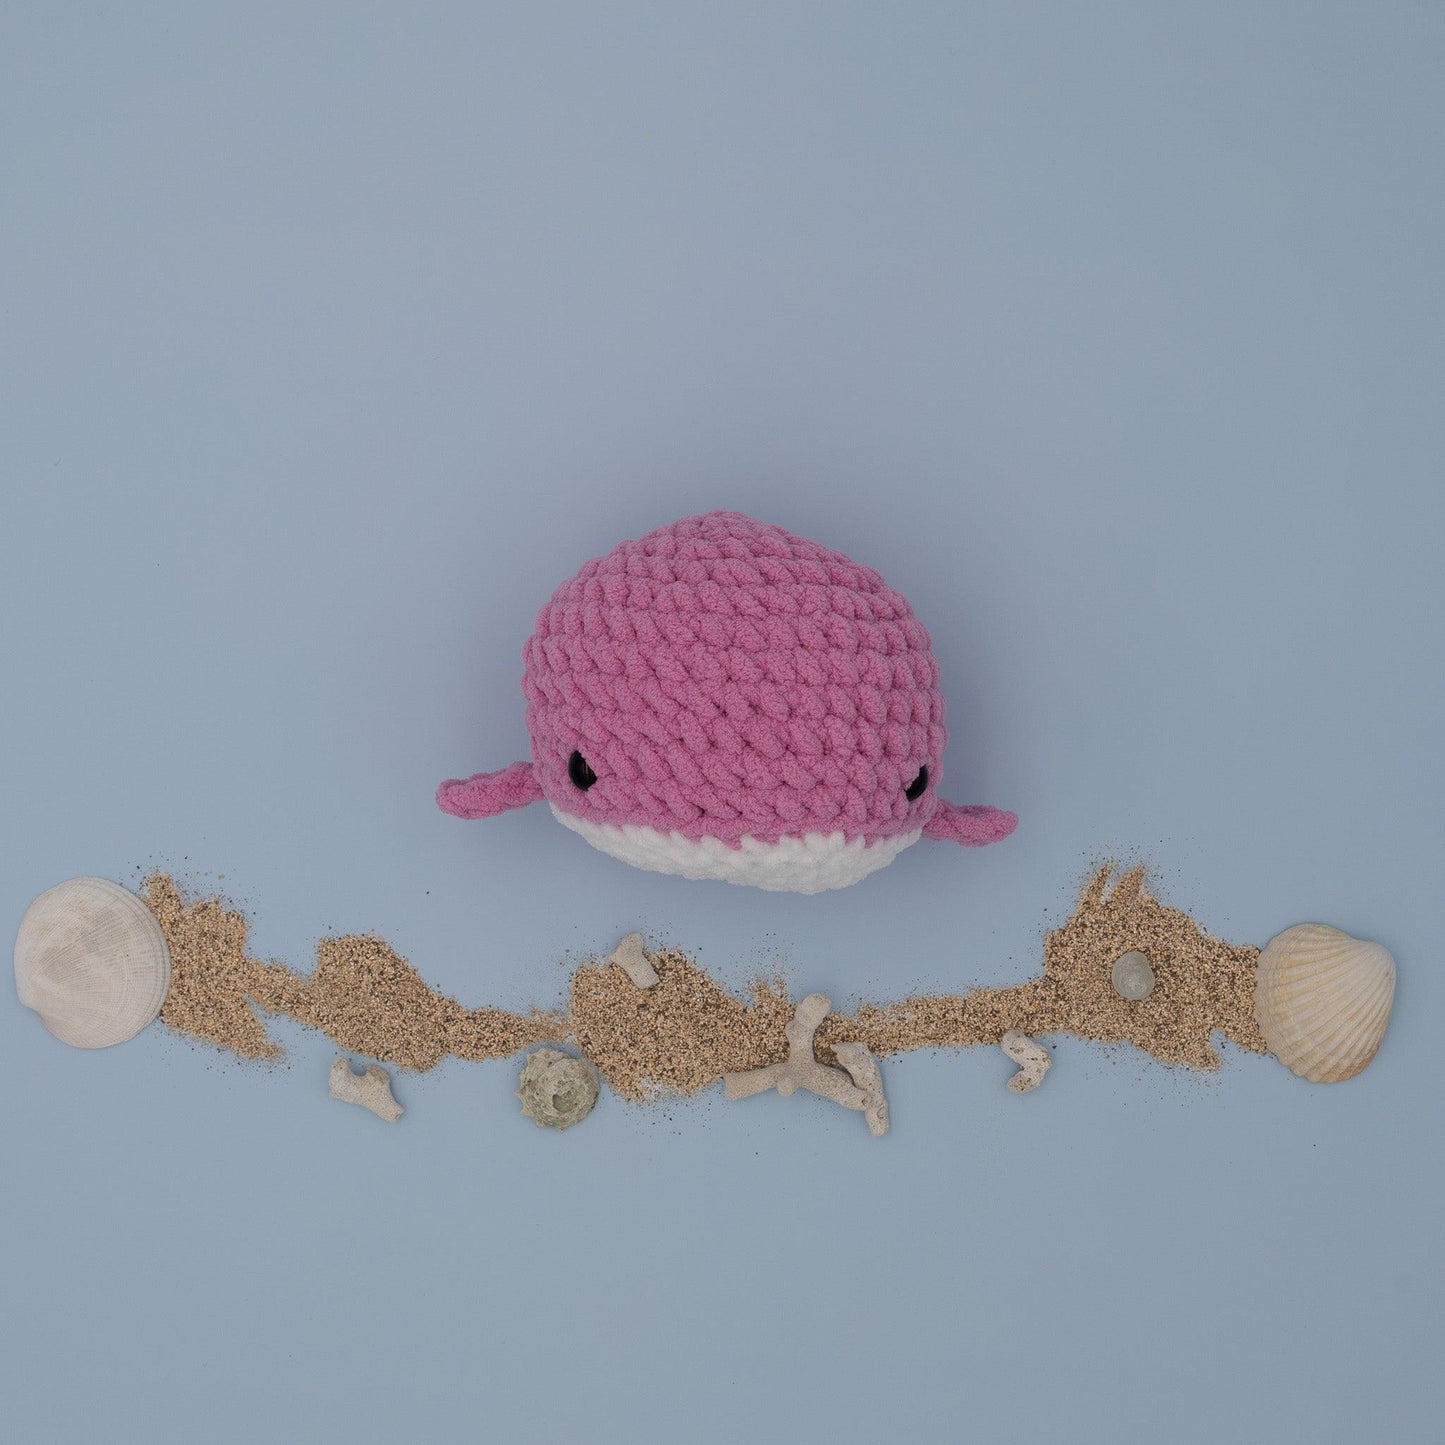 4Stitches Designs 9 Inch Crochet Whale Plush Toy - Hand-Made Stuffed Animal Gift for Kids